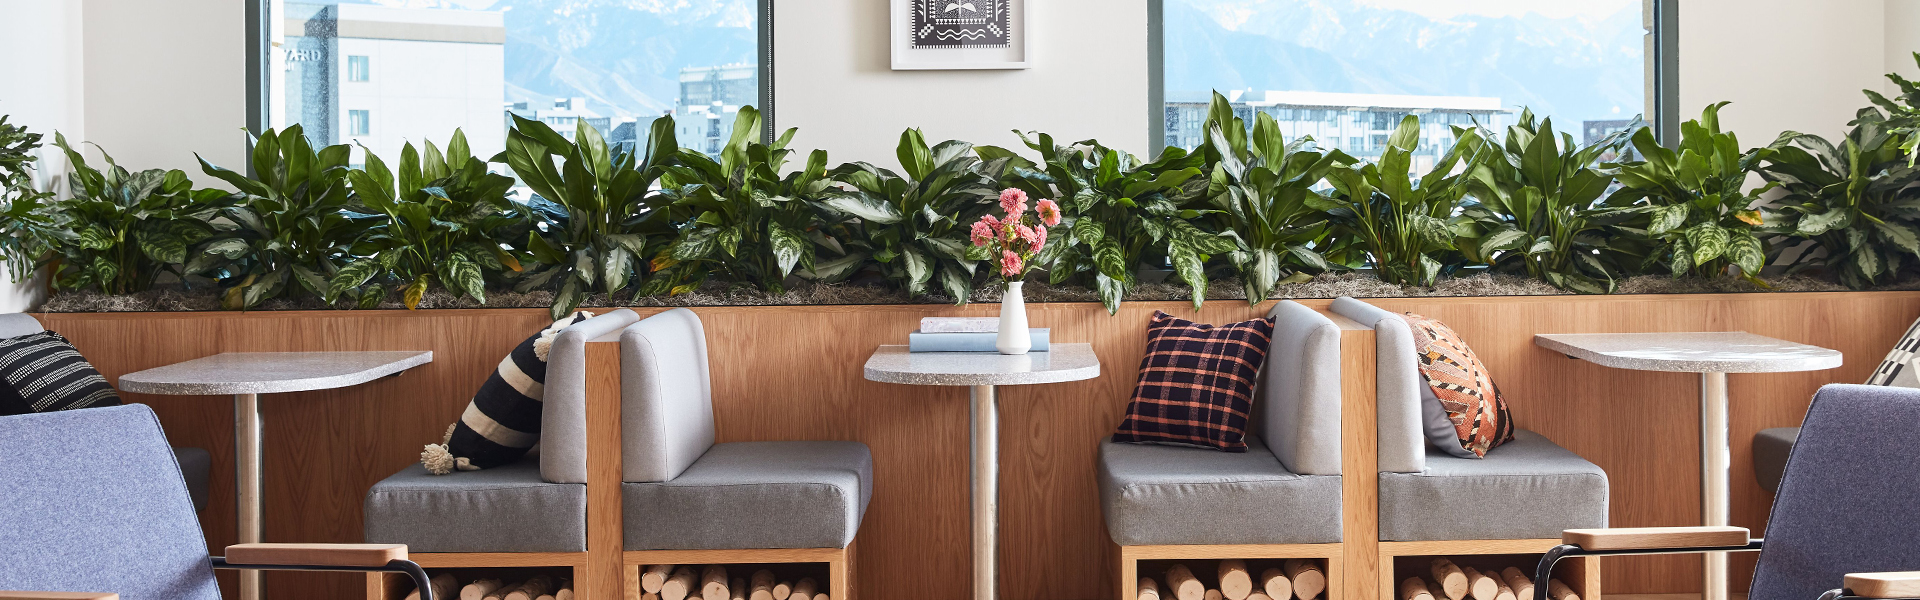 Office Plant Services NYC